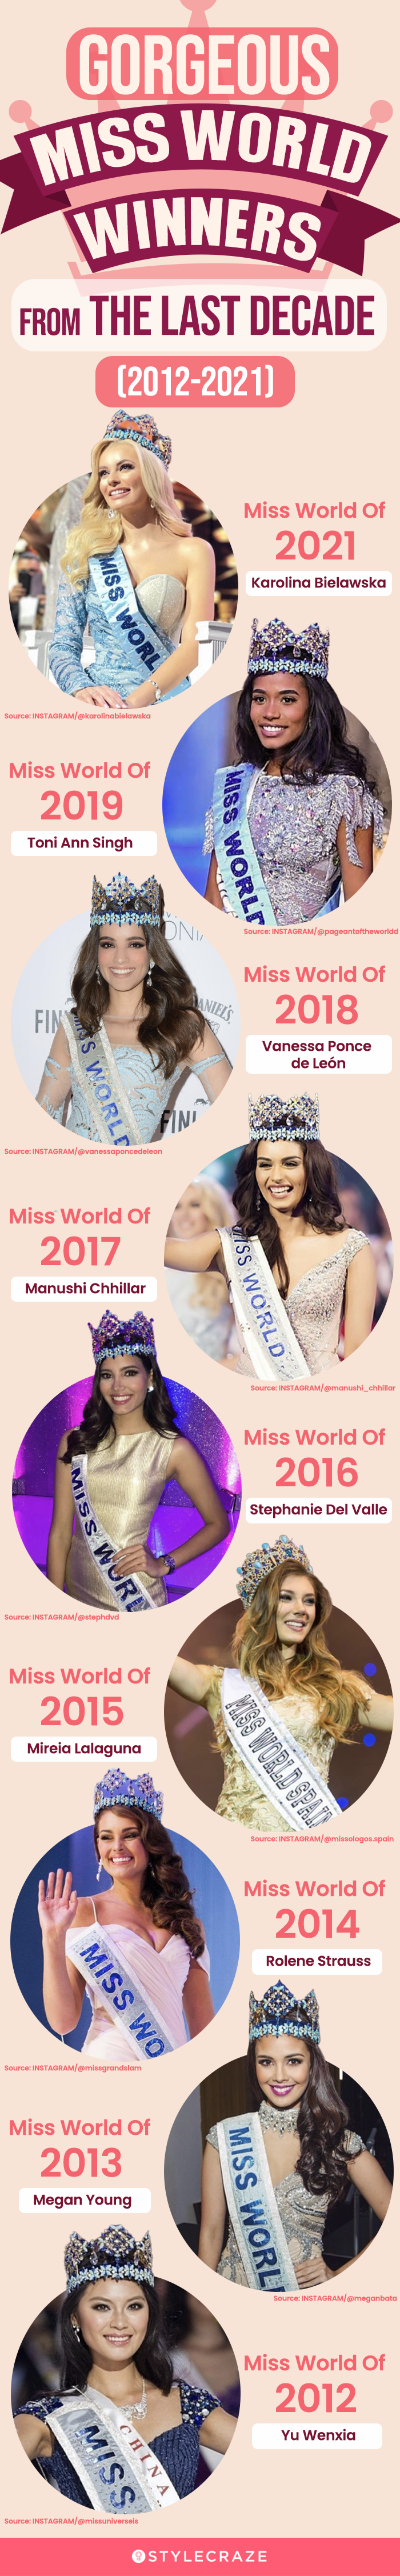 gorgeous miss world winners from the last decade [infographic]